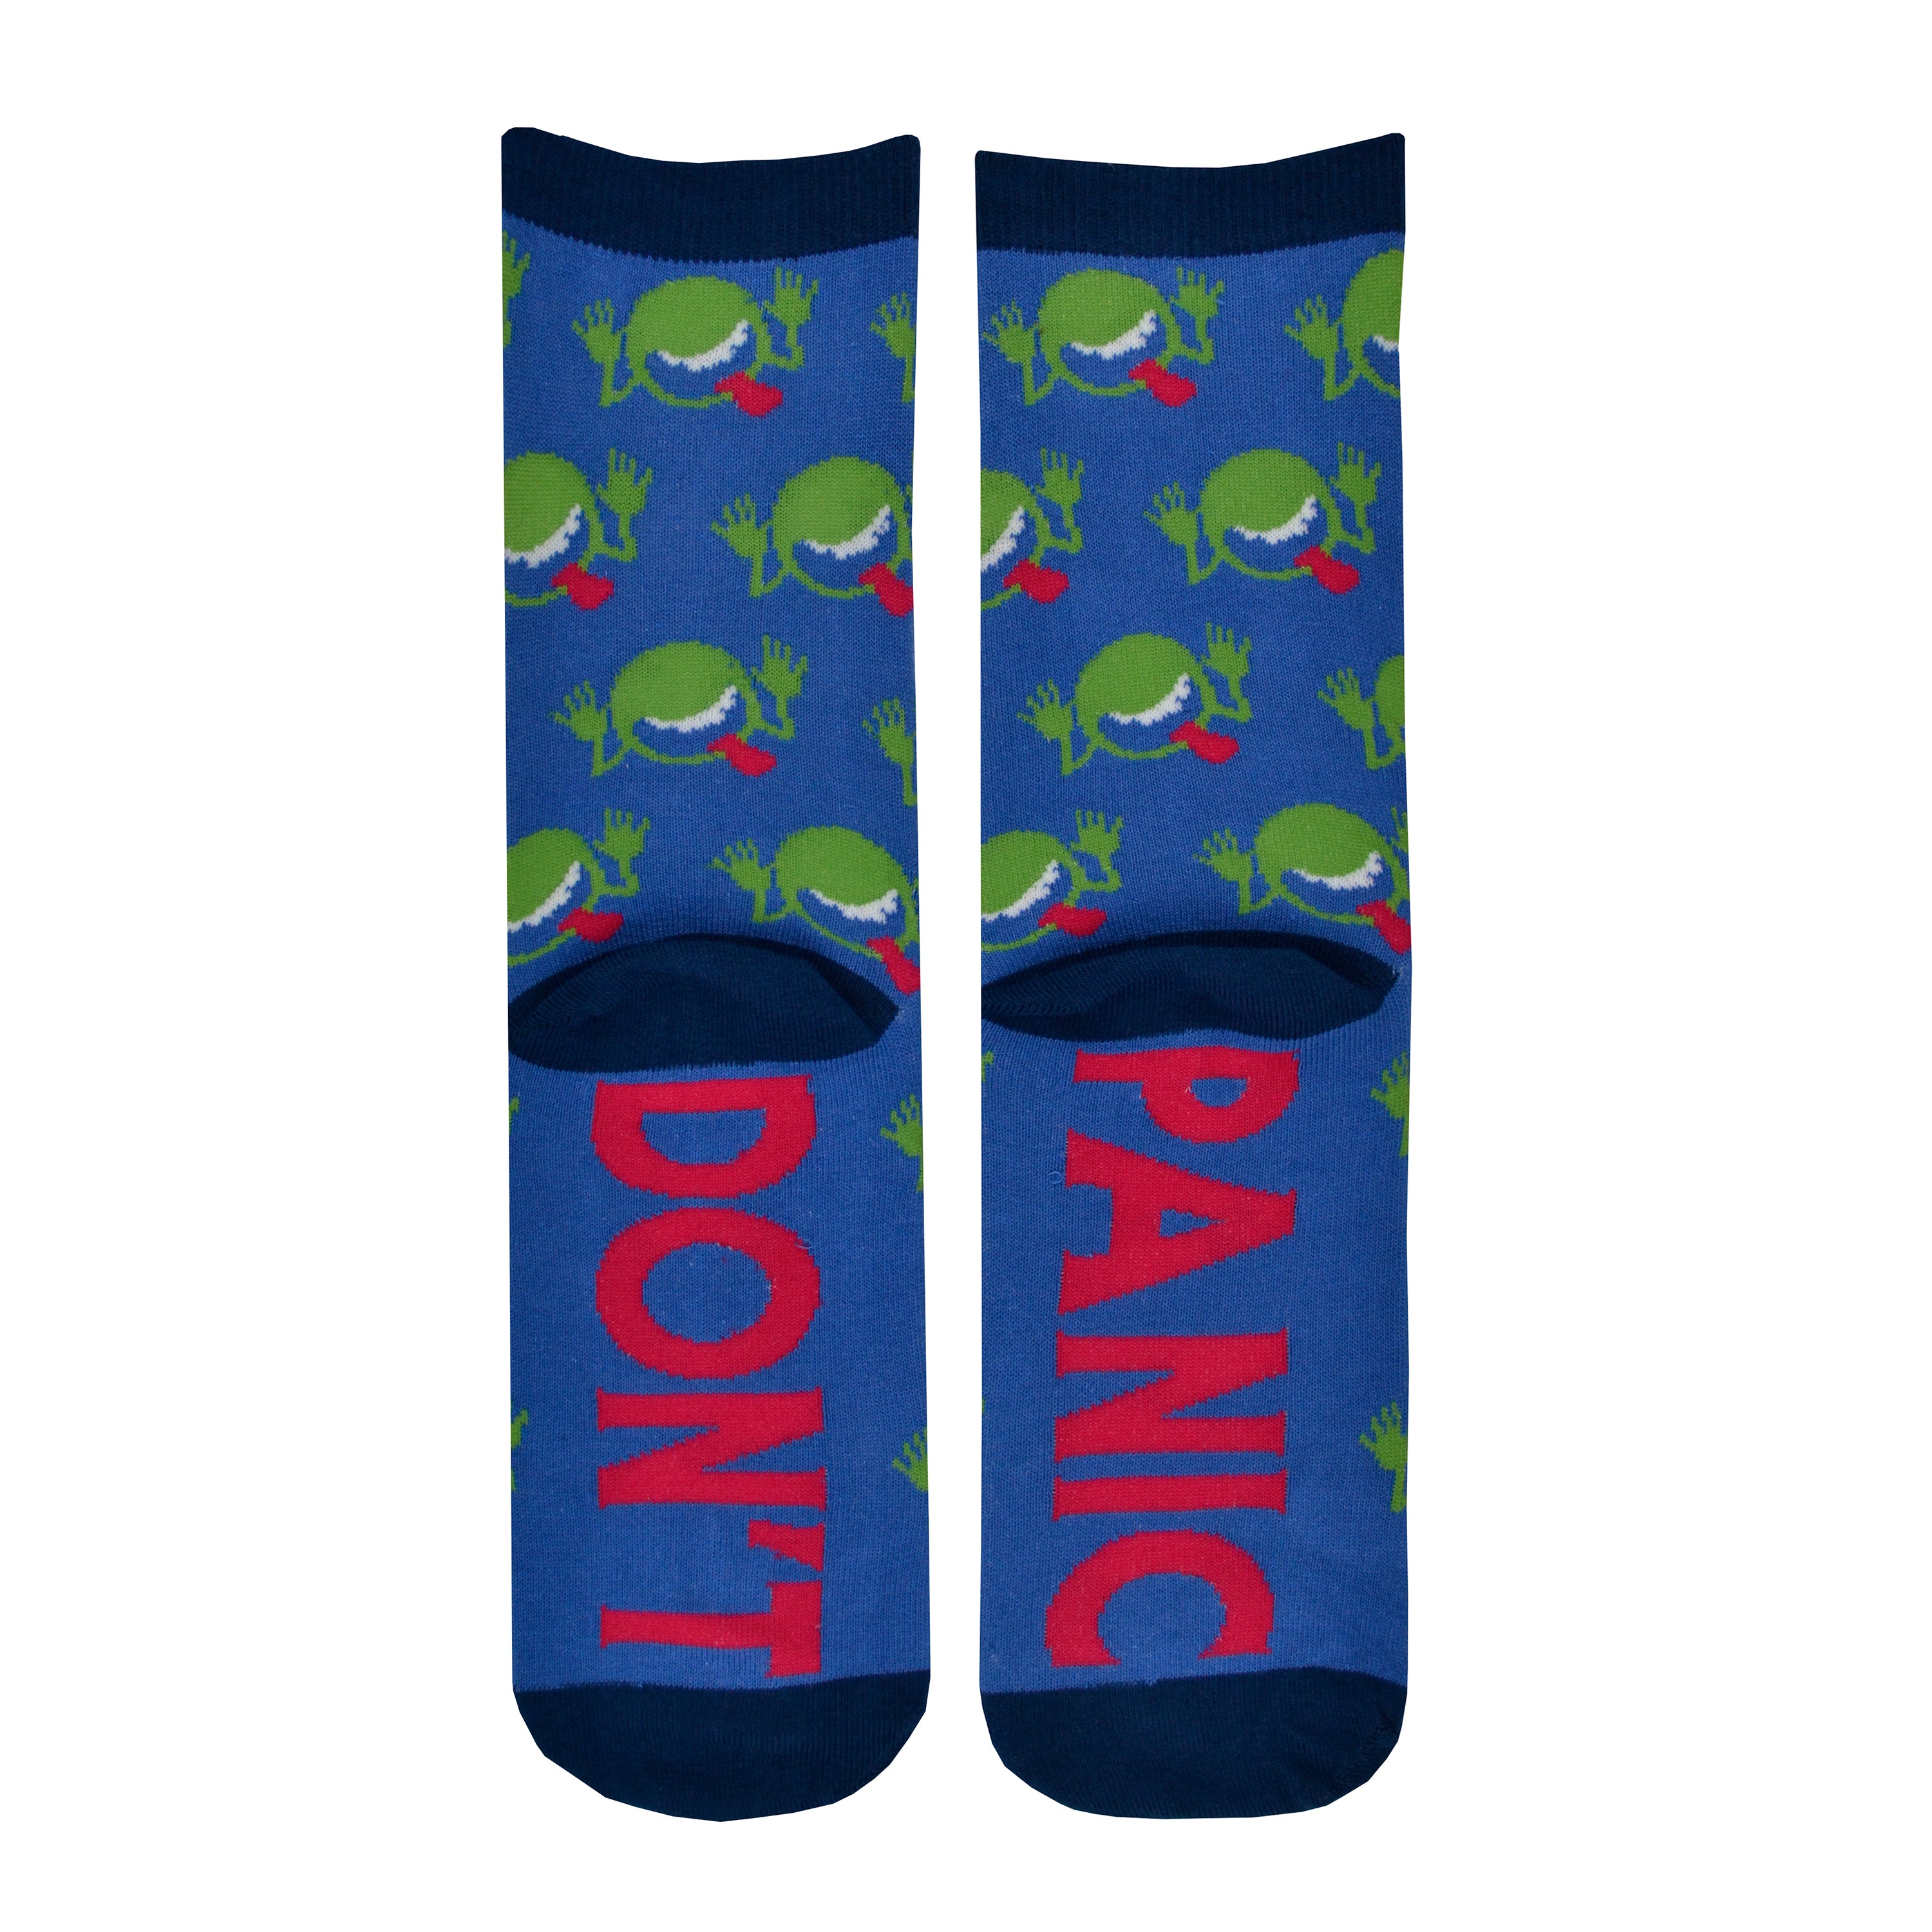 Shown in a flatlay, the rear side of a pair of unisex Out of Print blue cotton crew socks with green goofy faces sticking out their tongue like on the book cover, “Don’t” on the sole of one foot, “Panic” on the other, and navy cuff/heel/toe